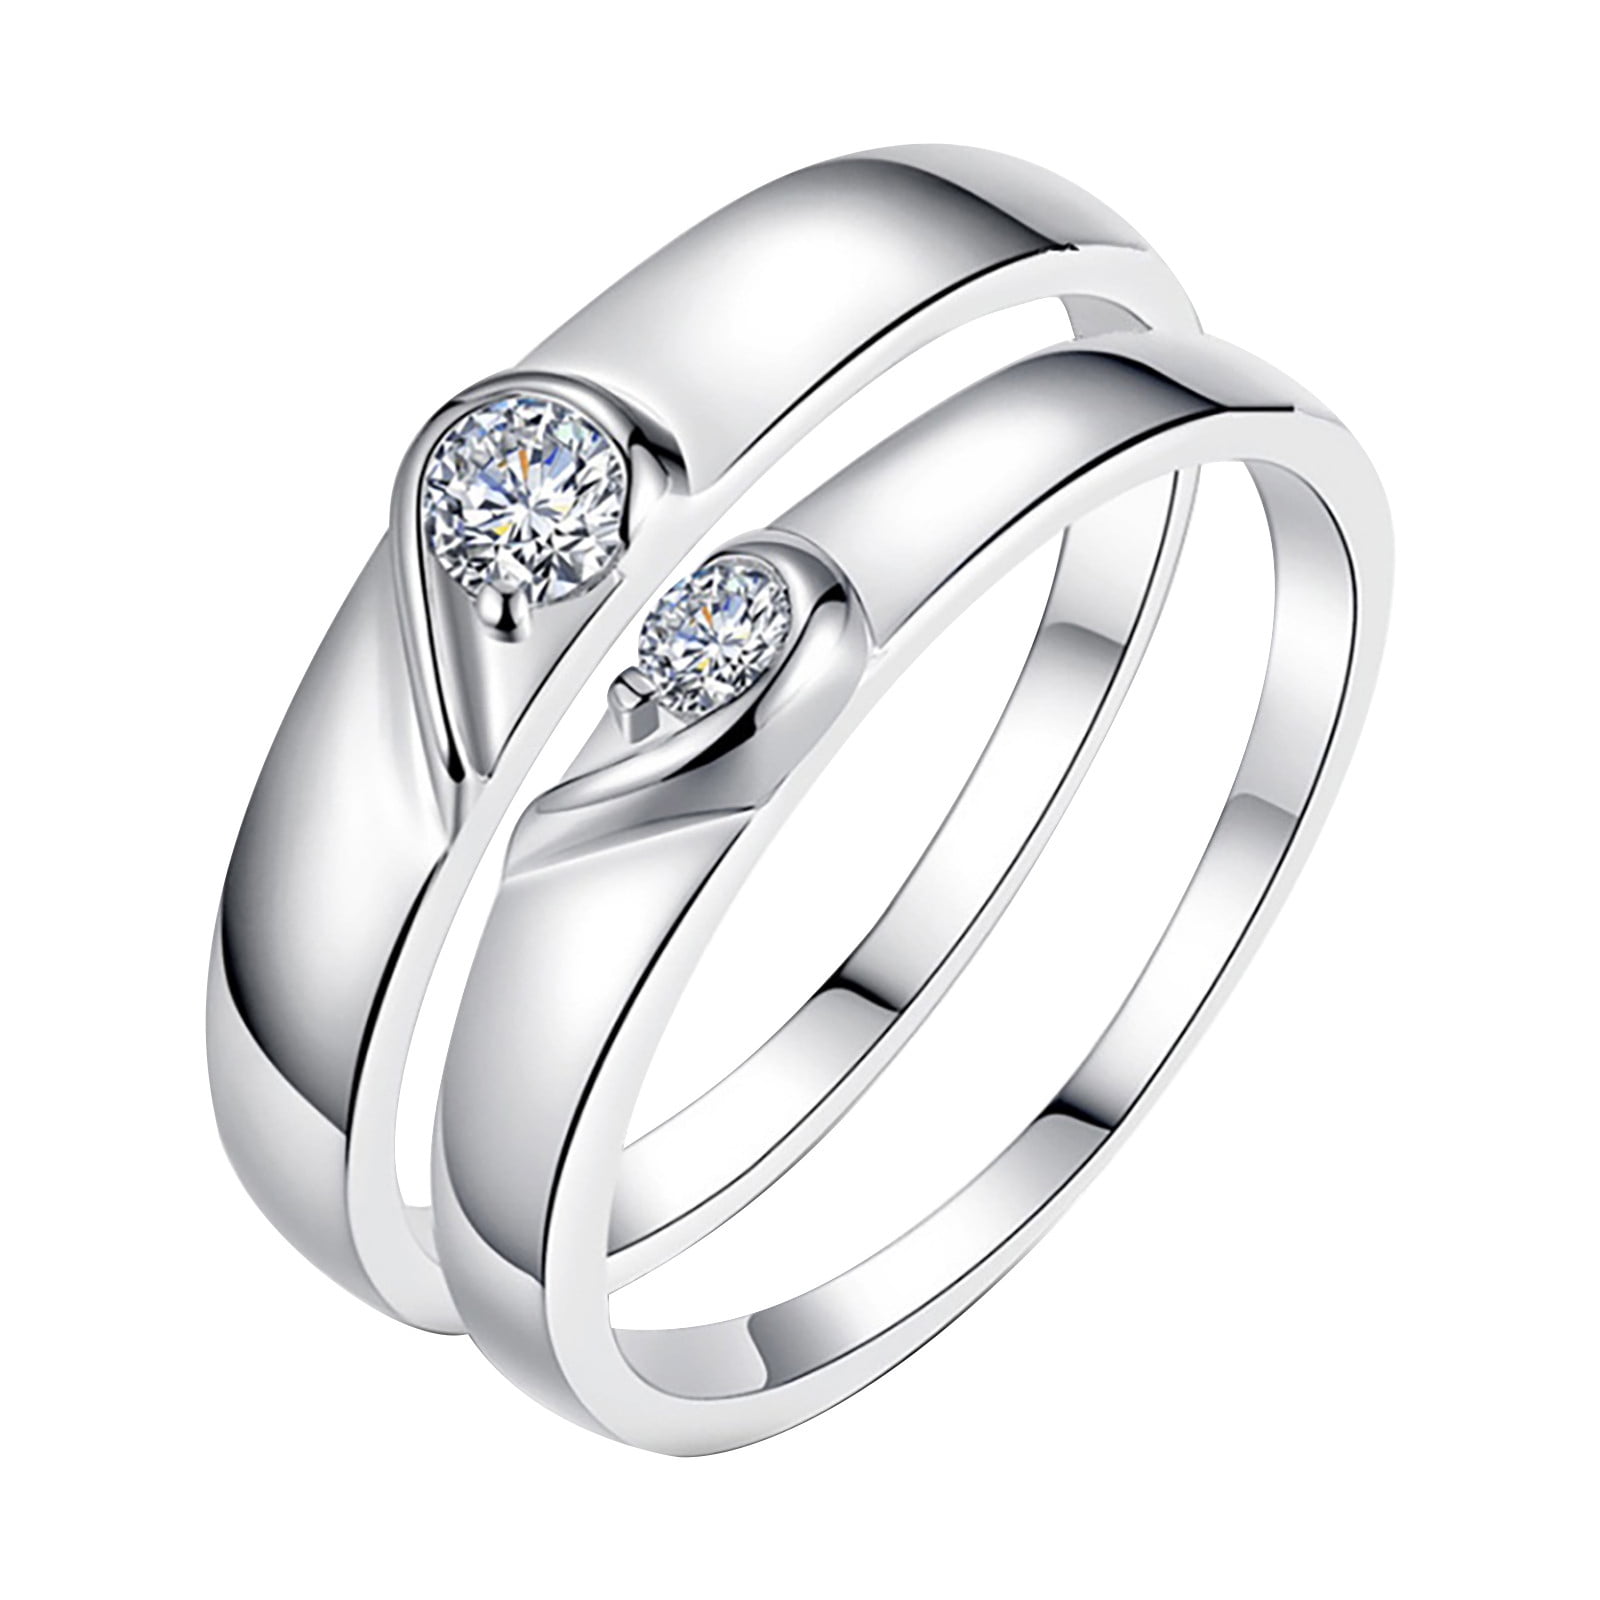 AED 131.6 - [100 Years With You] Couple Moissanite Silver Rings -  www.duzai-jewelry.com